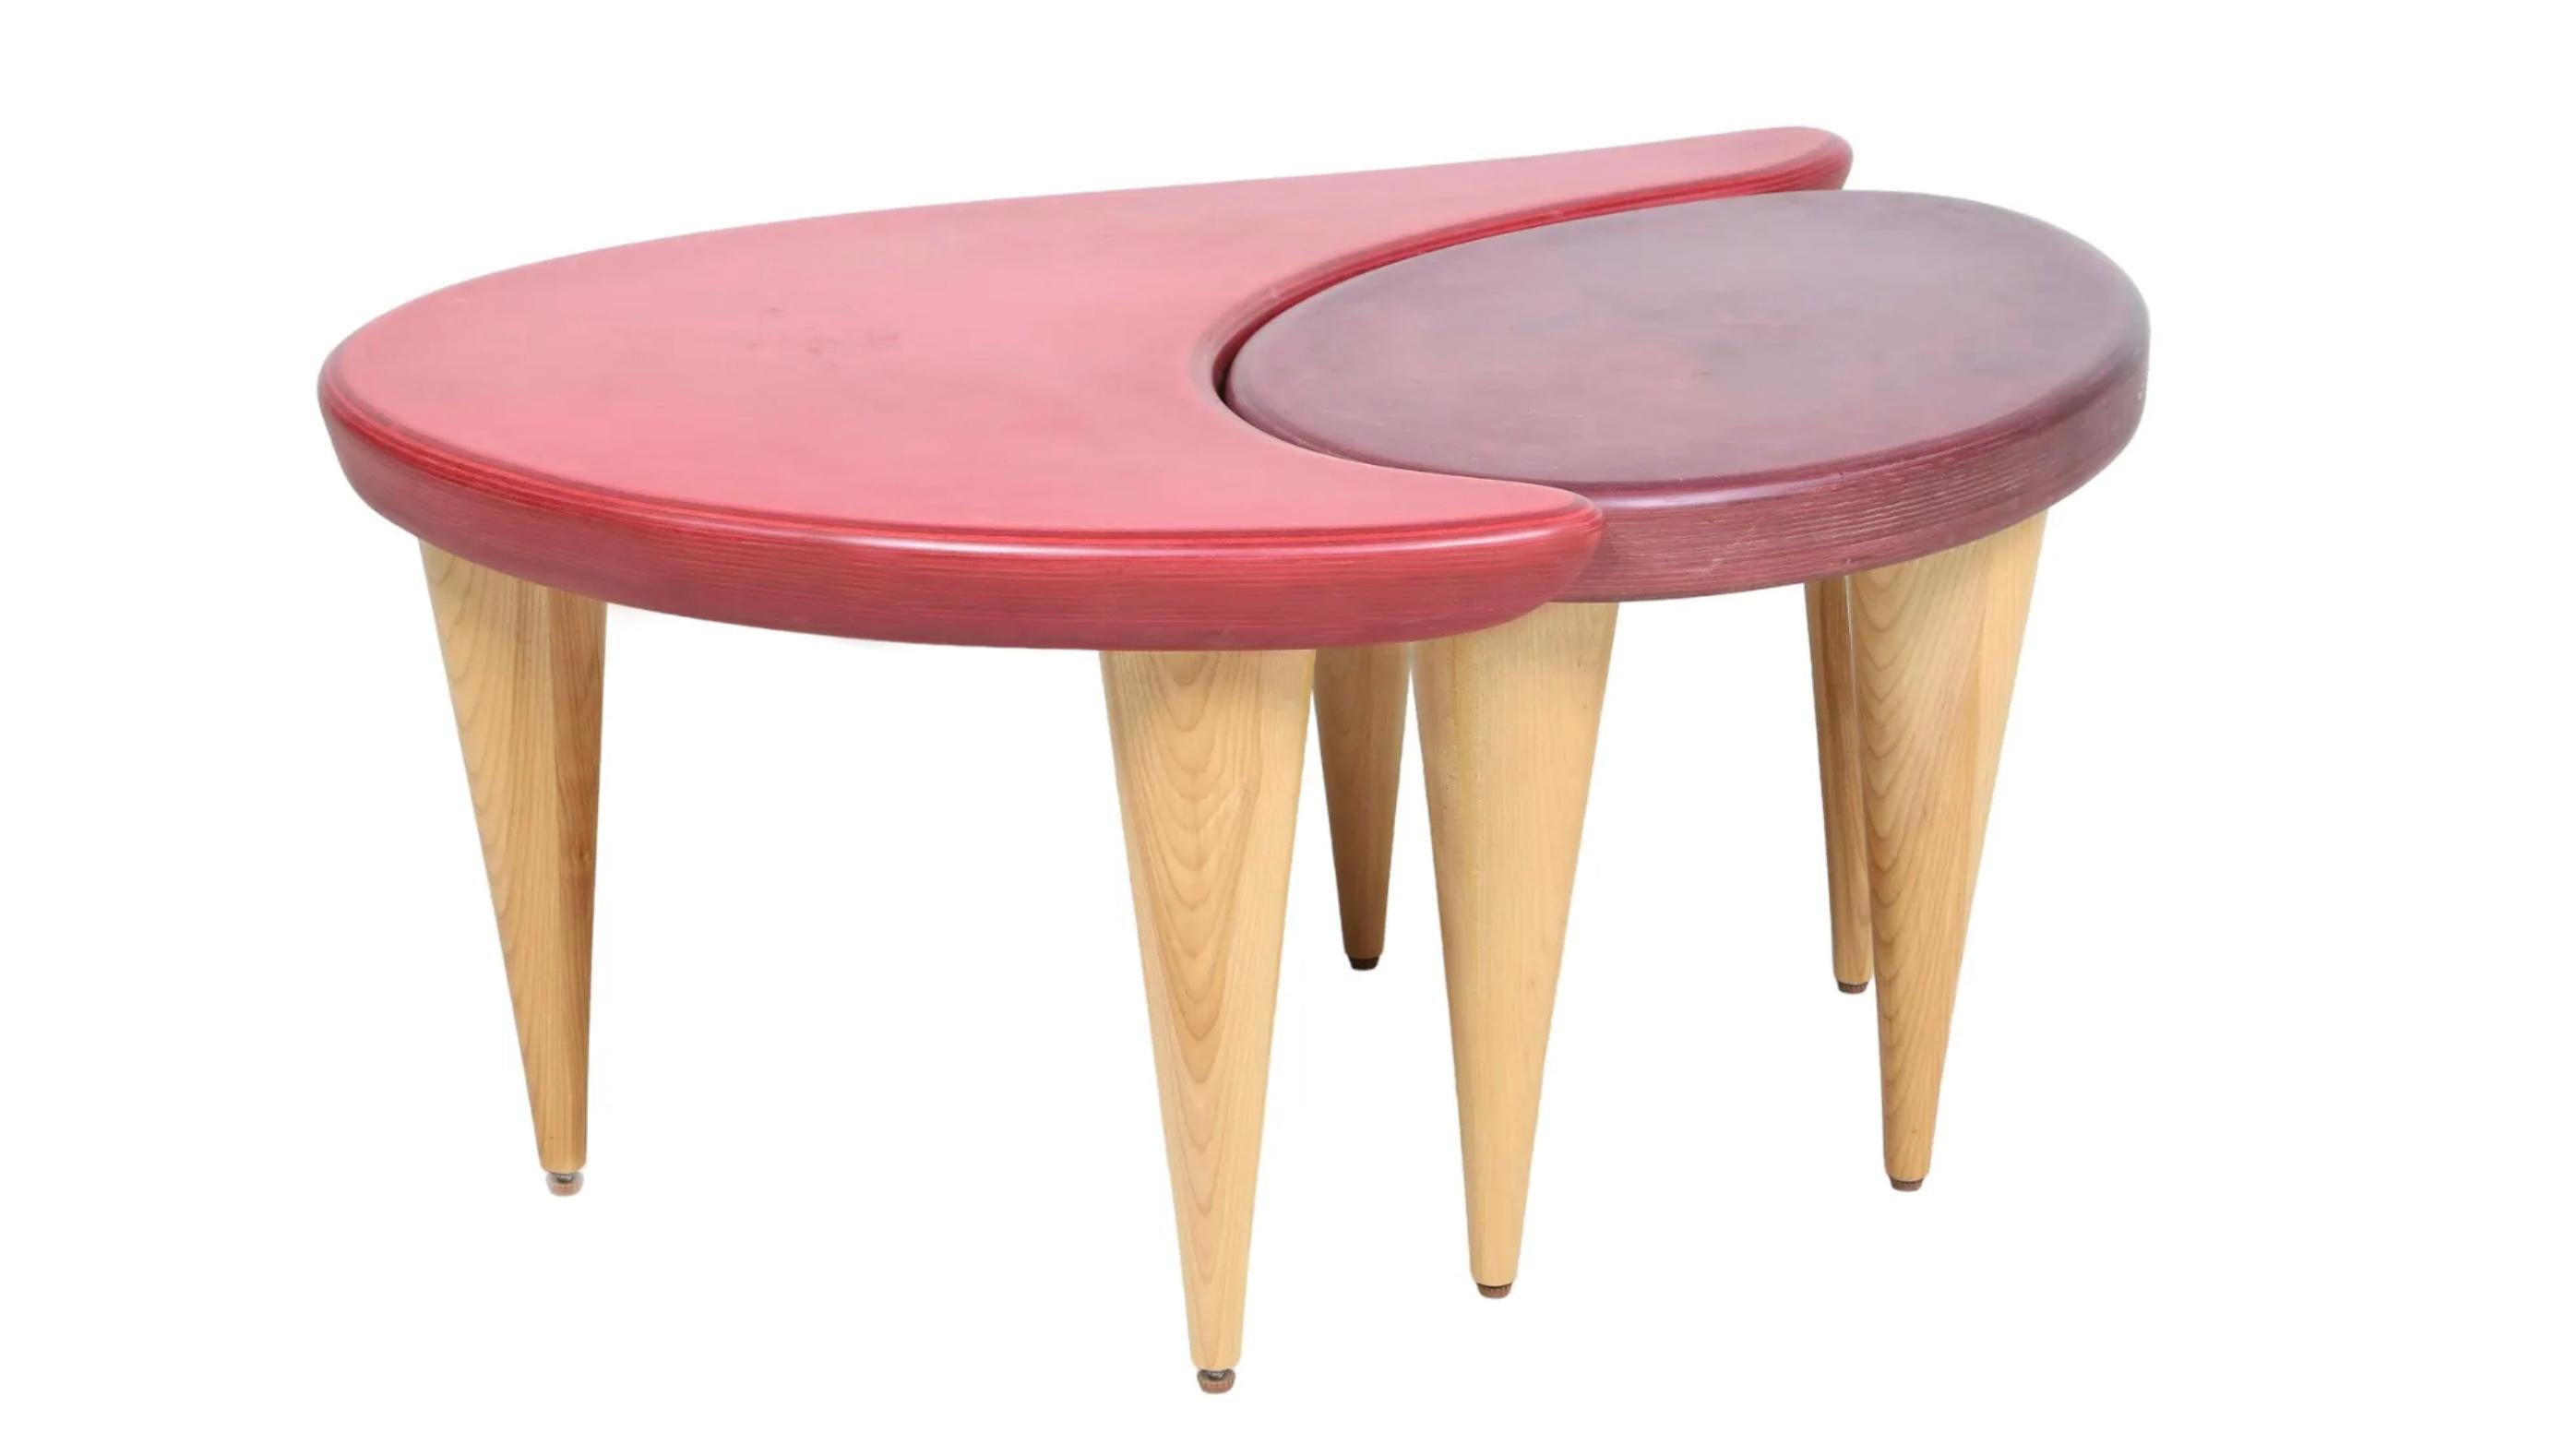 American Post Modern Set of Organic Biomorphic Studio Coffee Table or End Tables For Sale